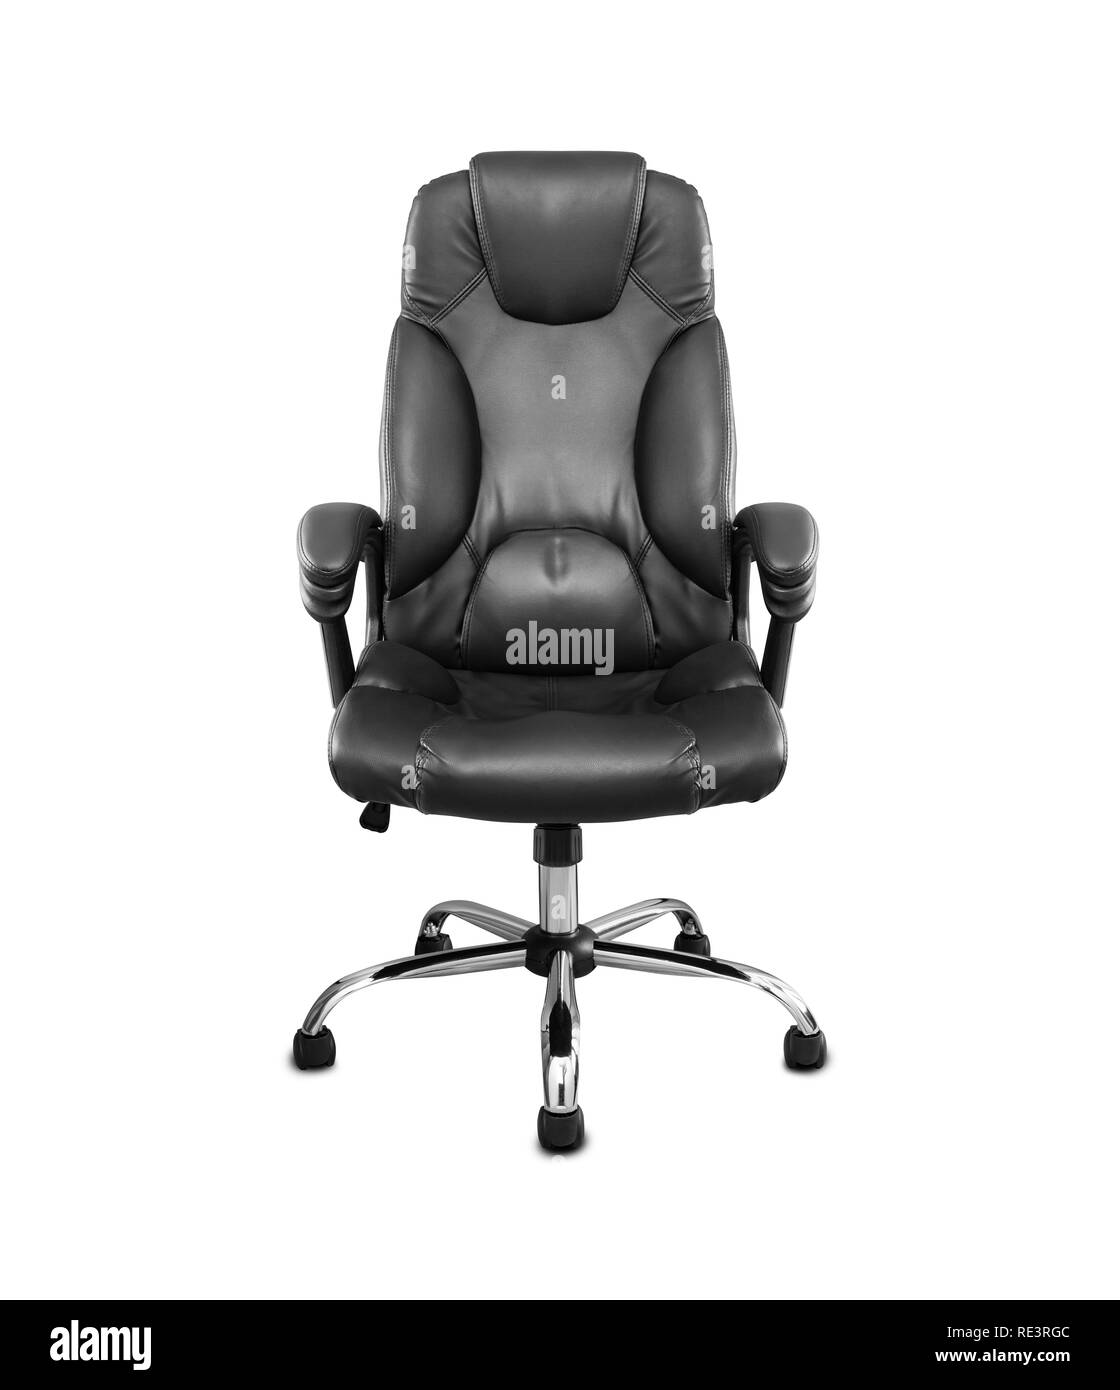 The office chair from black leather. Isolated on white background. Stock Photo